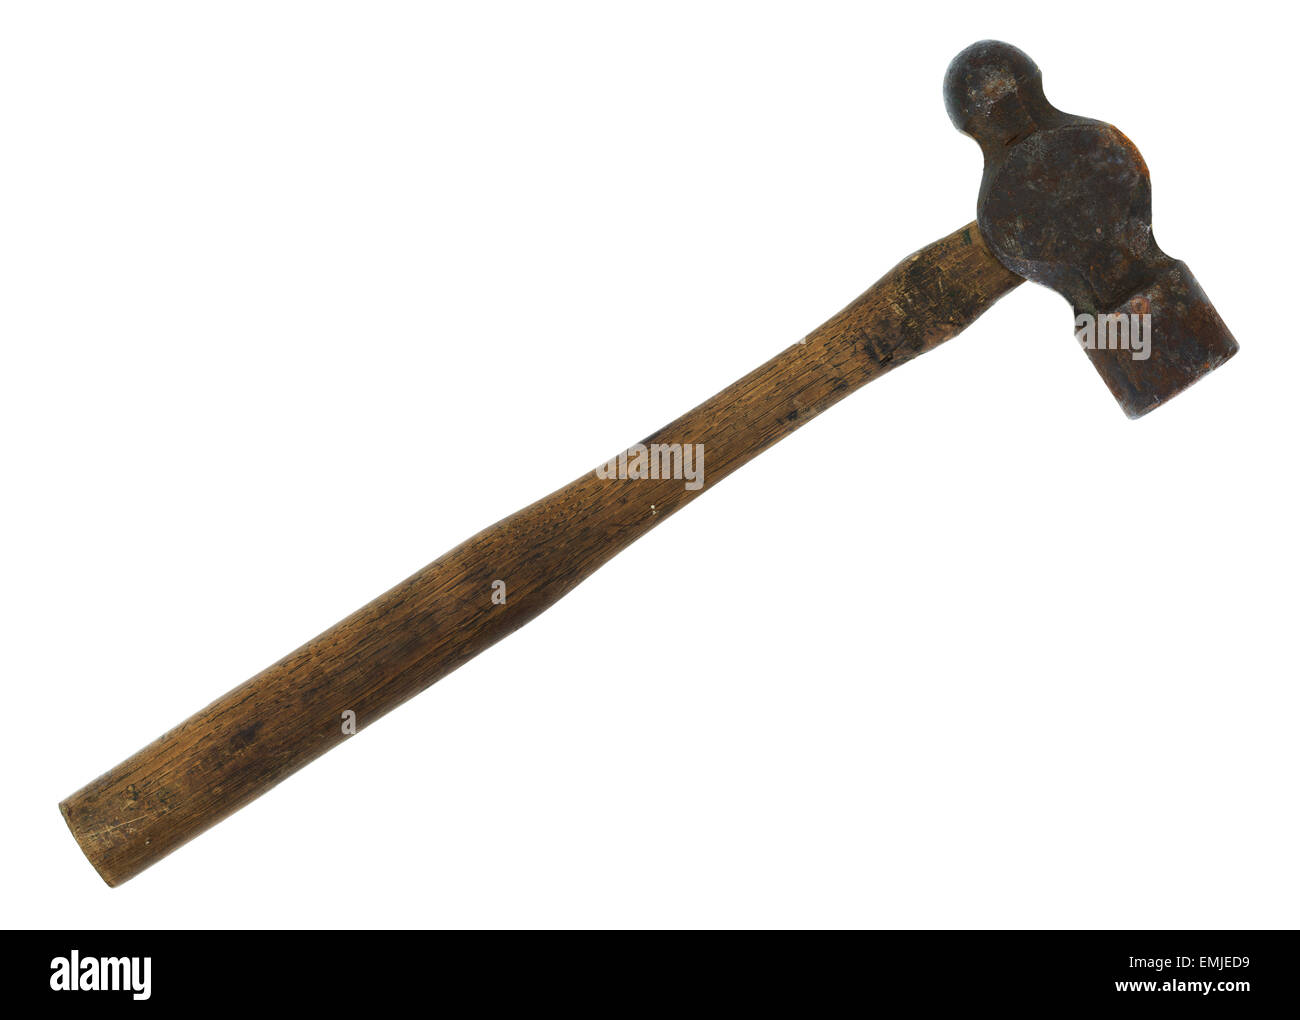 A large antique ball-peen hammer isolated on a white background. Stock Photo